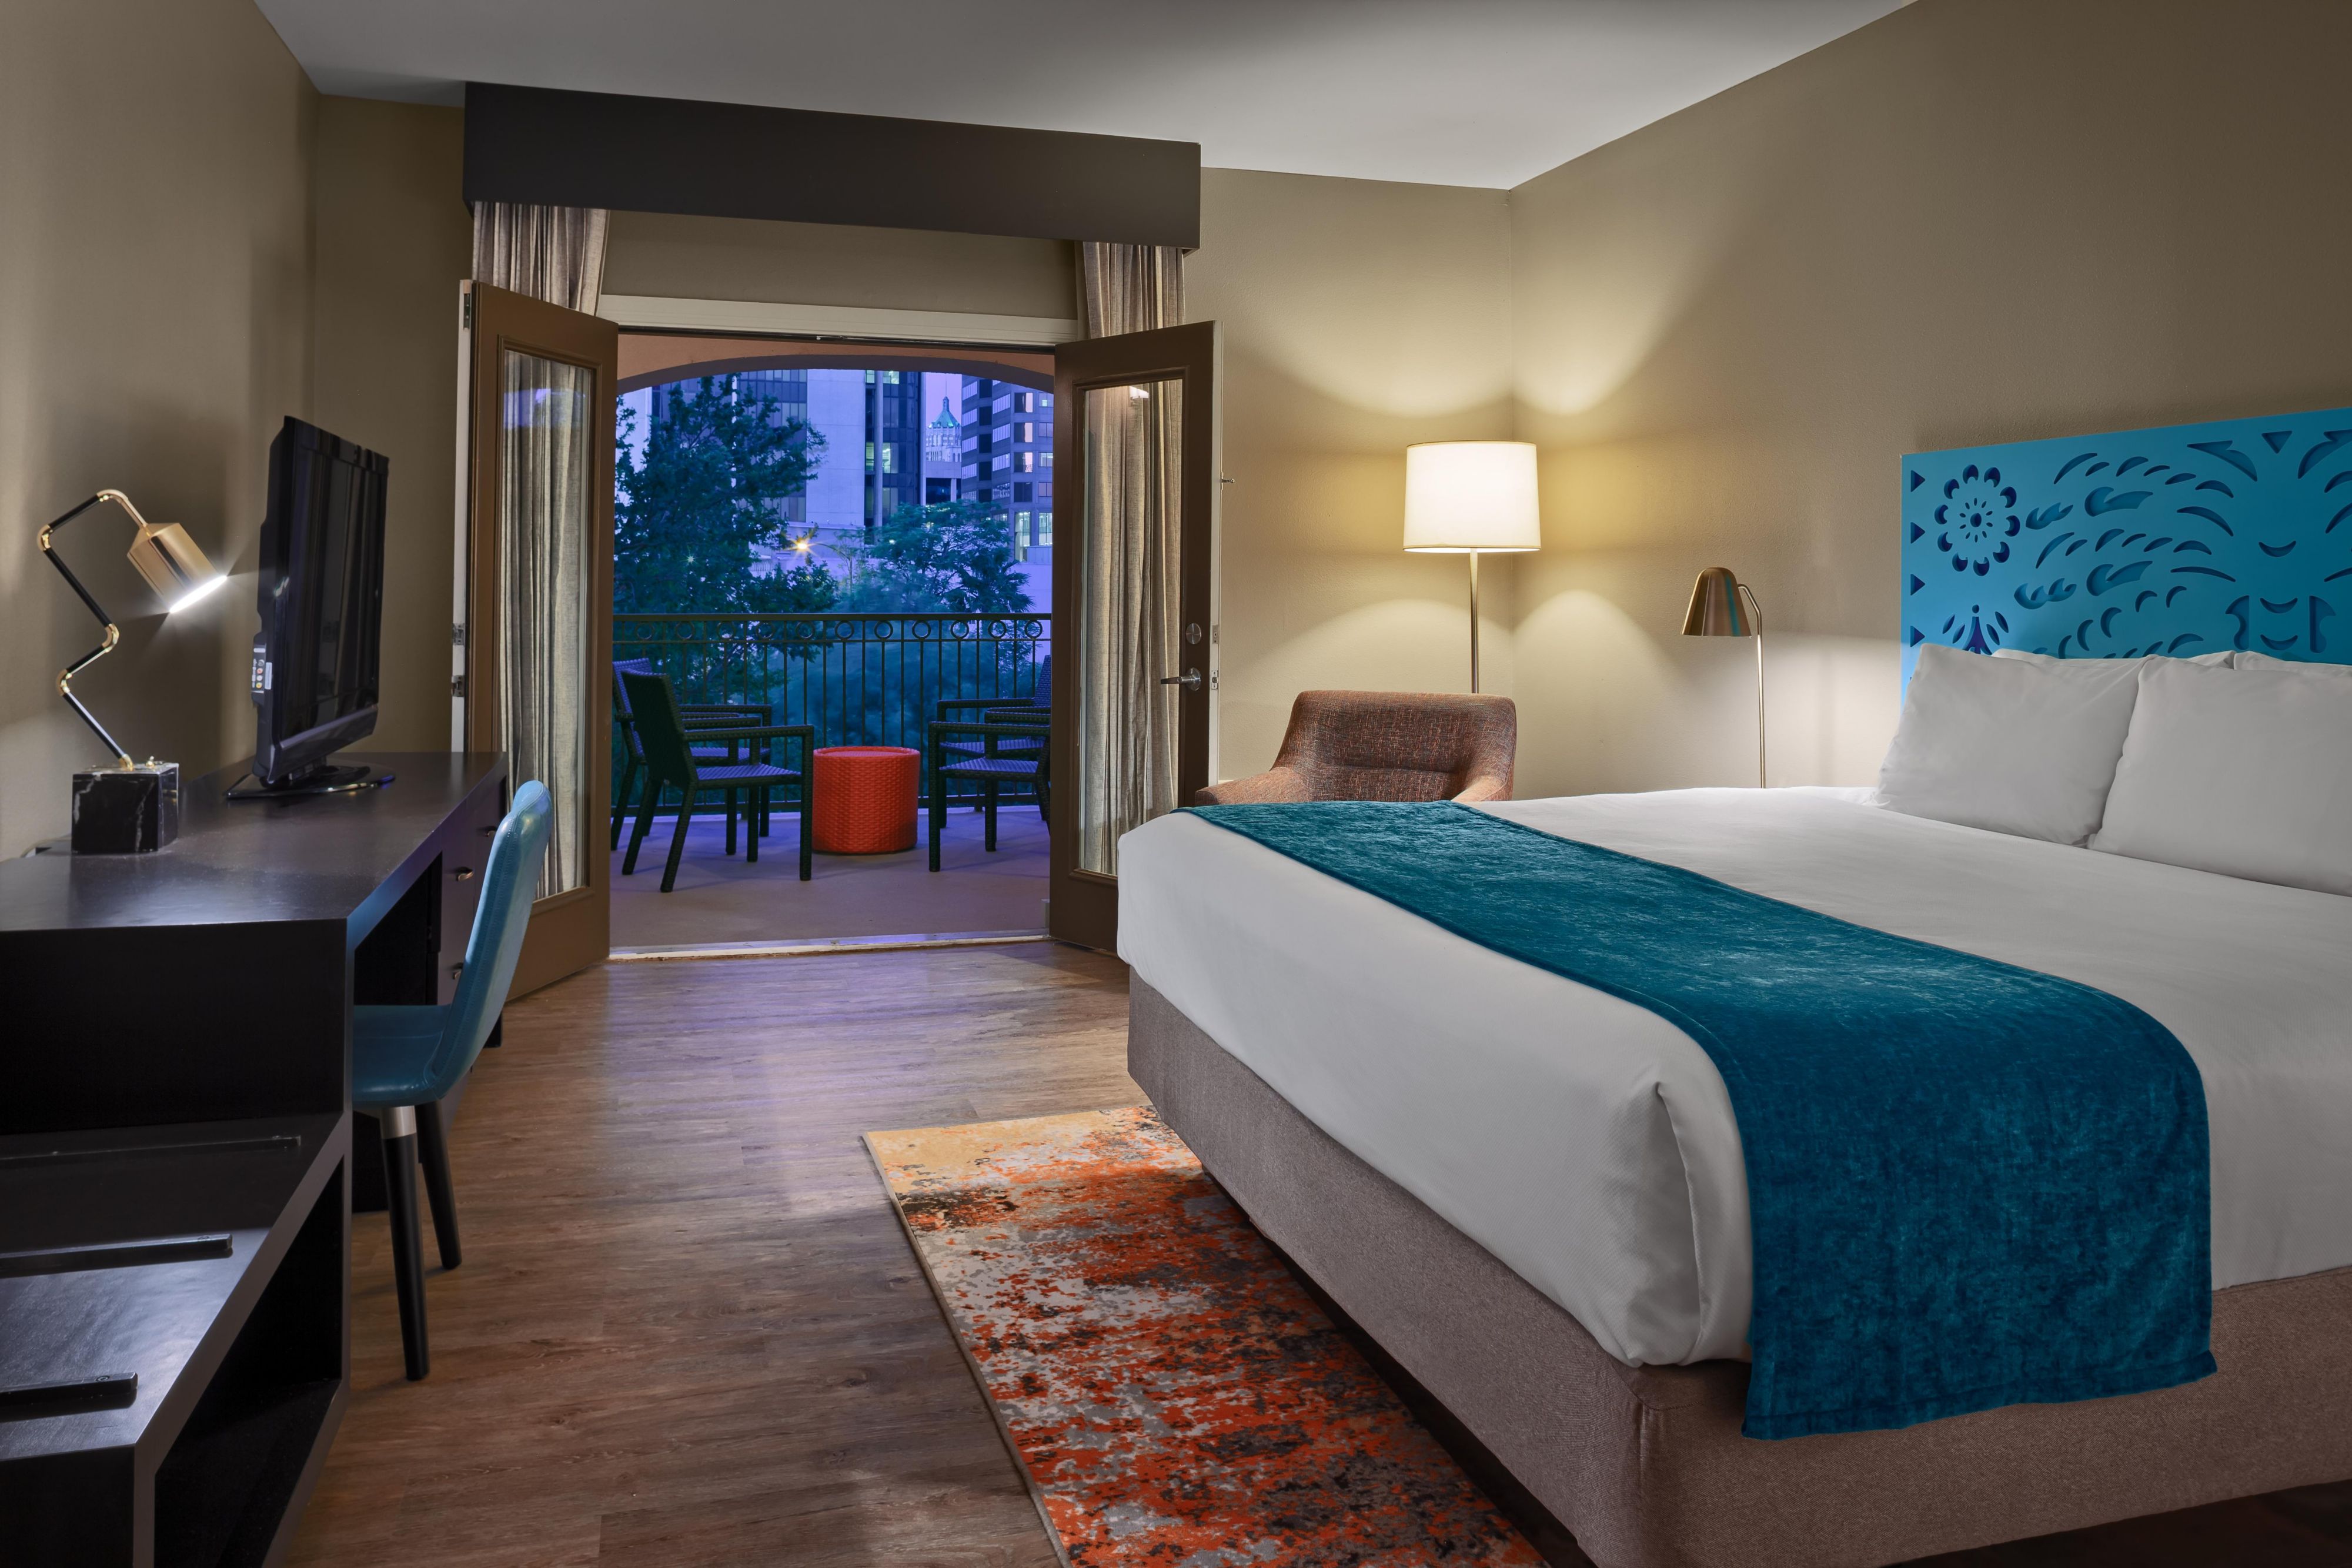 Move-in week, Parents' Week or Graduation, we're the perfect host with renovated rooms for your College visit.